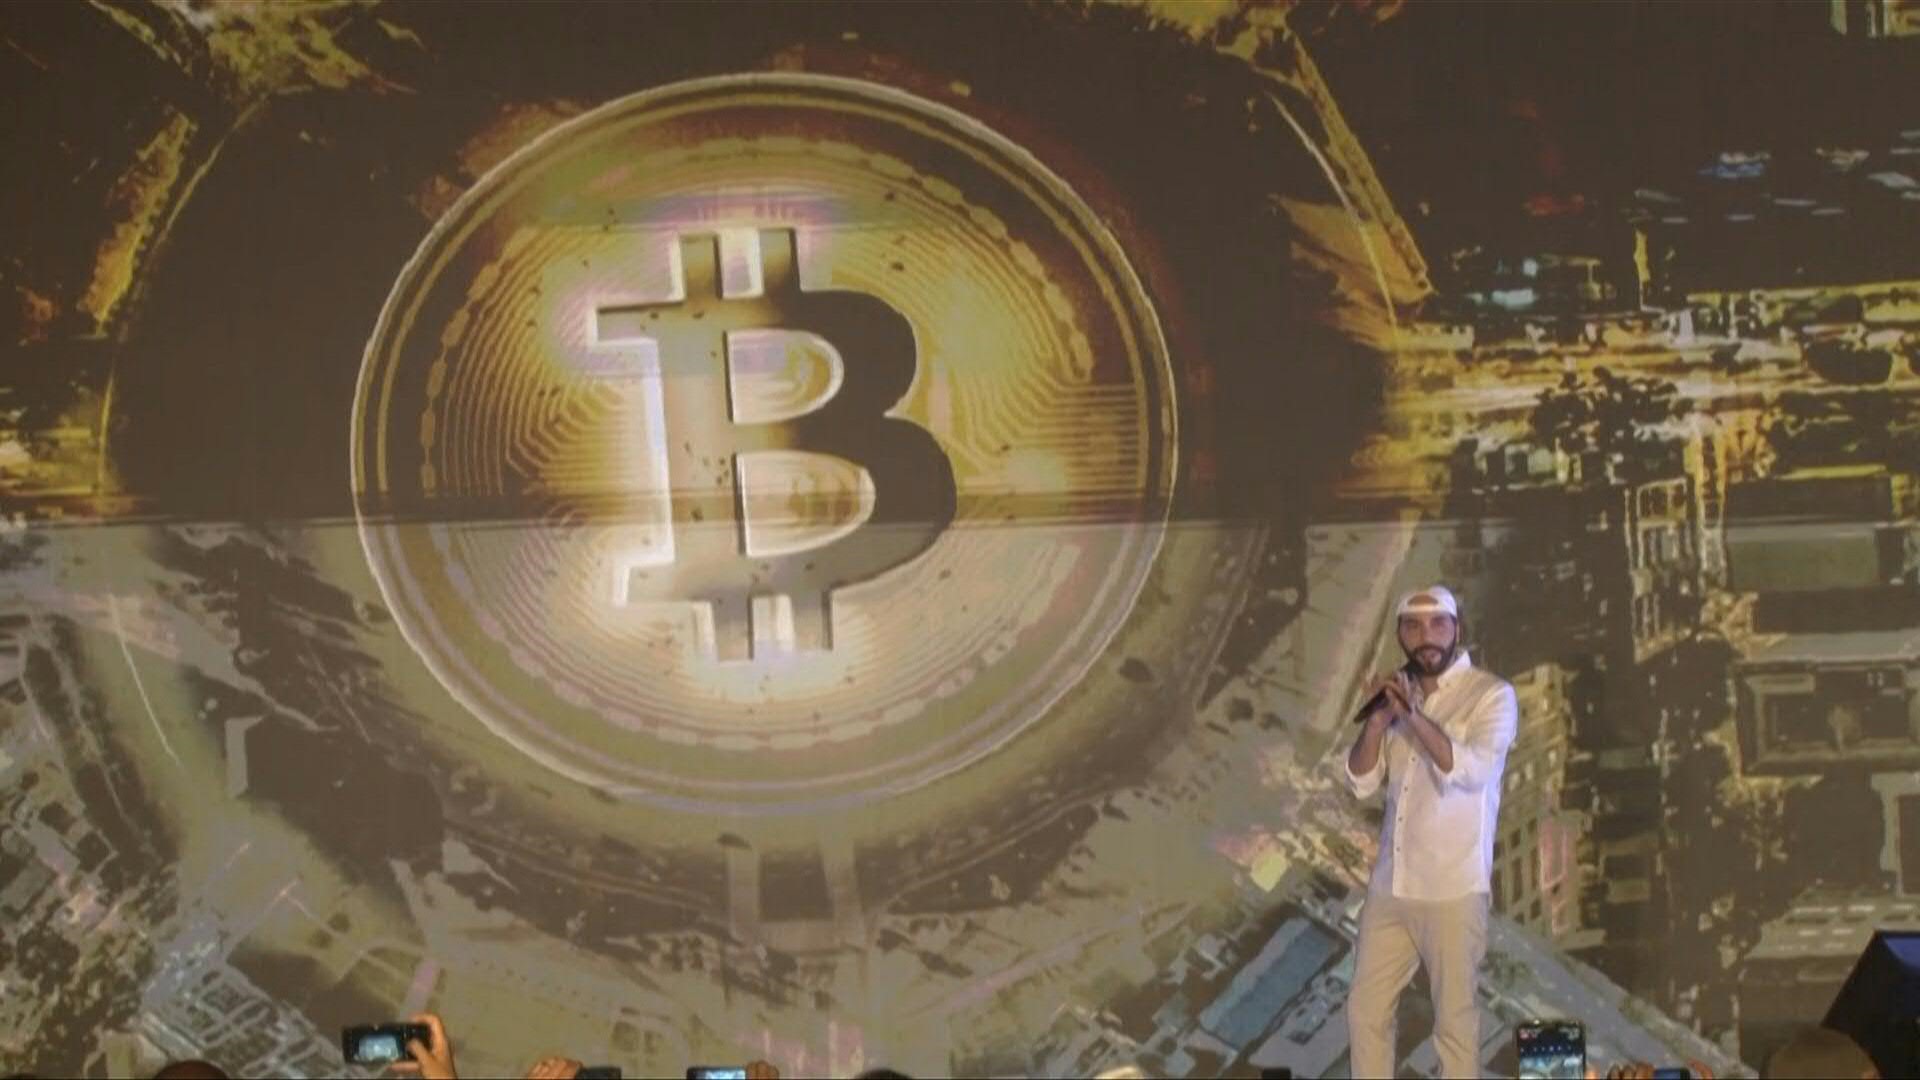 El Salvador acquired 500 bitcoins for 15.3 million dollars, taking advantage of the drop in the price of the cryptocurrency that is legal tender in the country, President Nayib Bukele announced Monday.